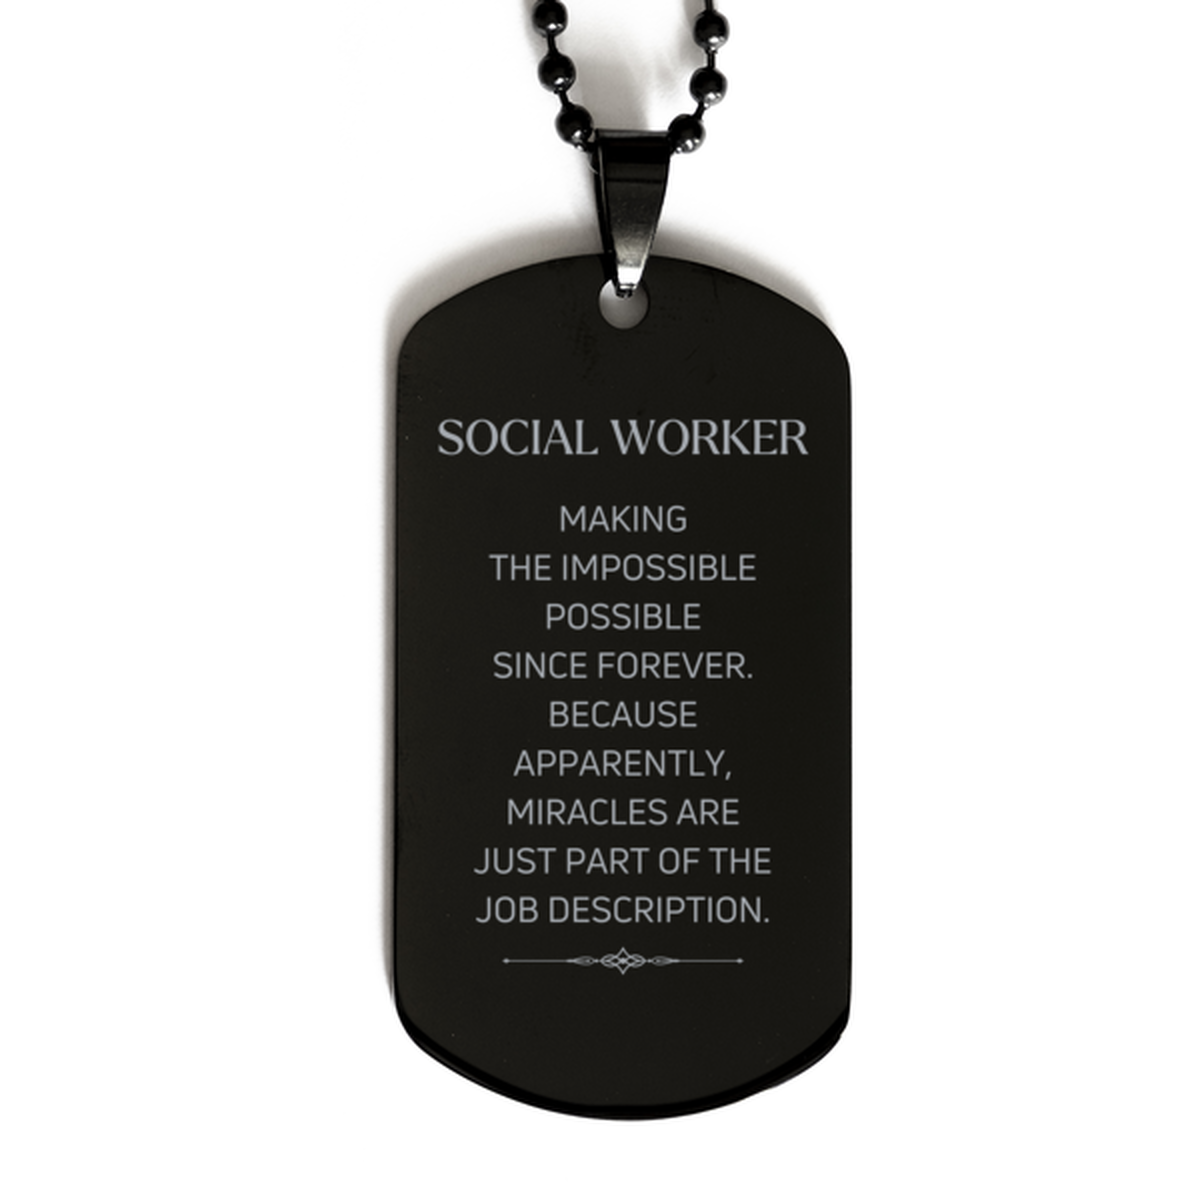 Funny Social Worker Gifts, Miracles are just part of the job description, Inspirational Birthday Black Dog Tag For Social Worker, Men, Women, Coworkers, Friends, Boss